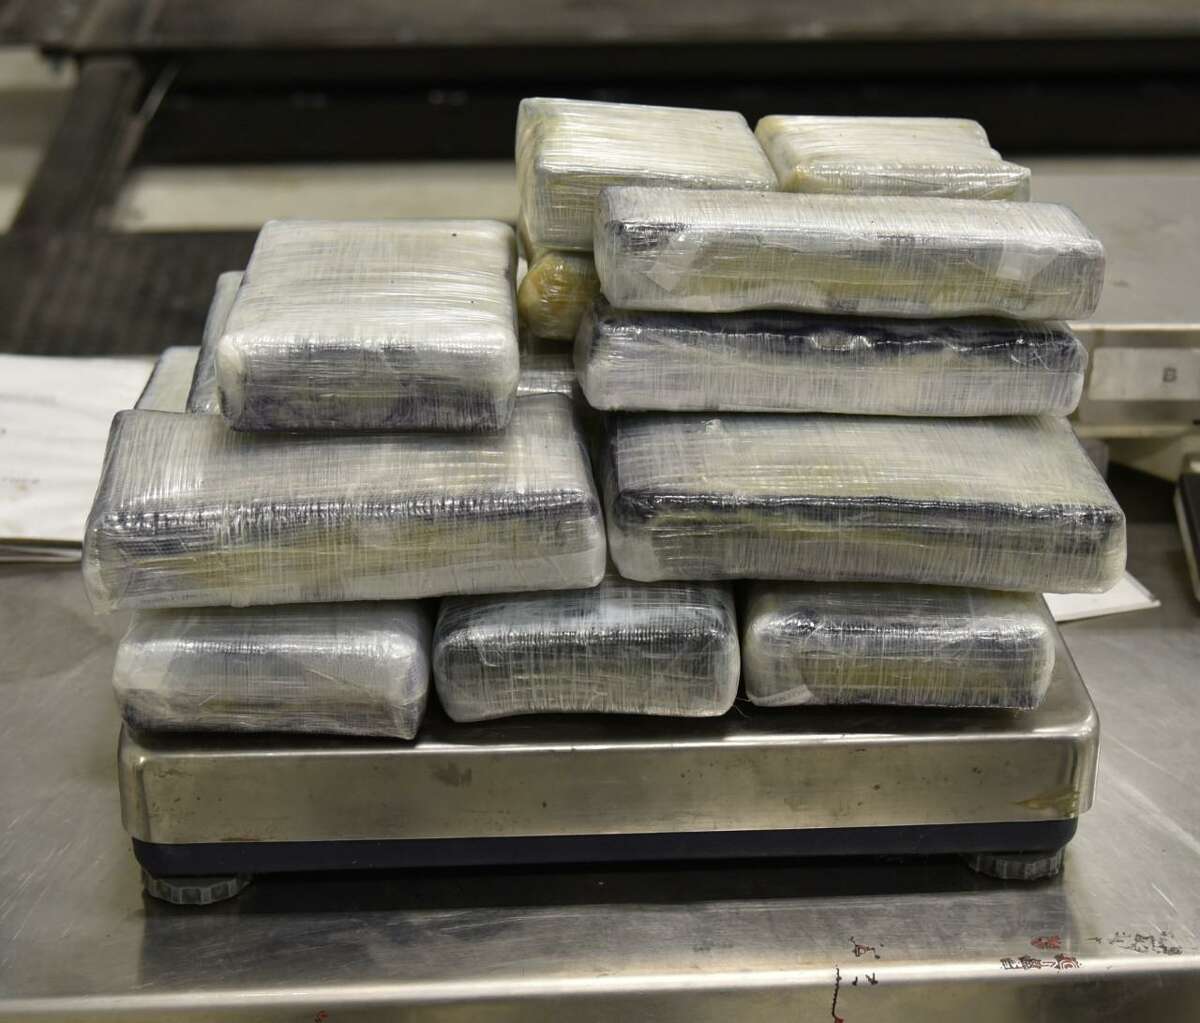 U.S. Customs and Border Protection officers seized these 37.61 pounds of cocaine on July 15 at the Juarez-Lincoln International Bridge. The cocaine had an estimated street value of $291,720. Three other seizures were also reported at local international bridges.